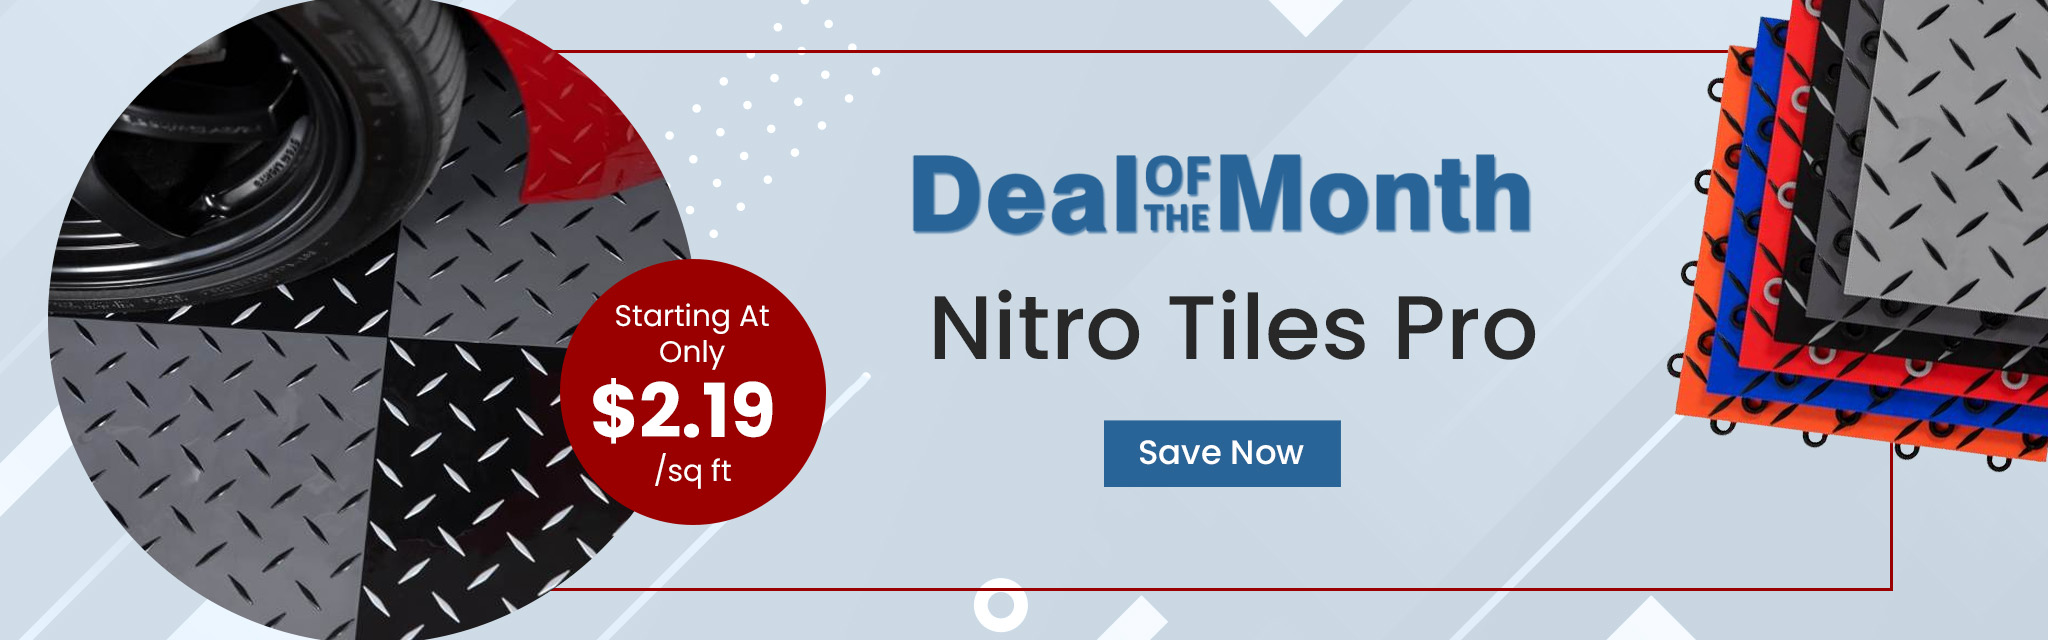 Deal Of The Month. Nitro Tiles Pro. Starting At Only $2.19 per square feet. Save Now